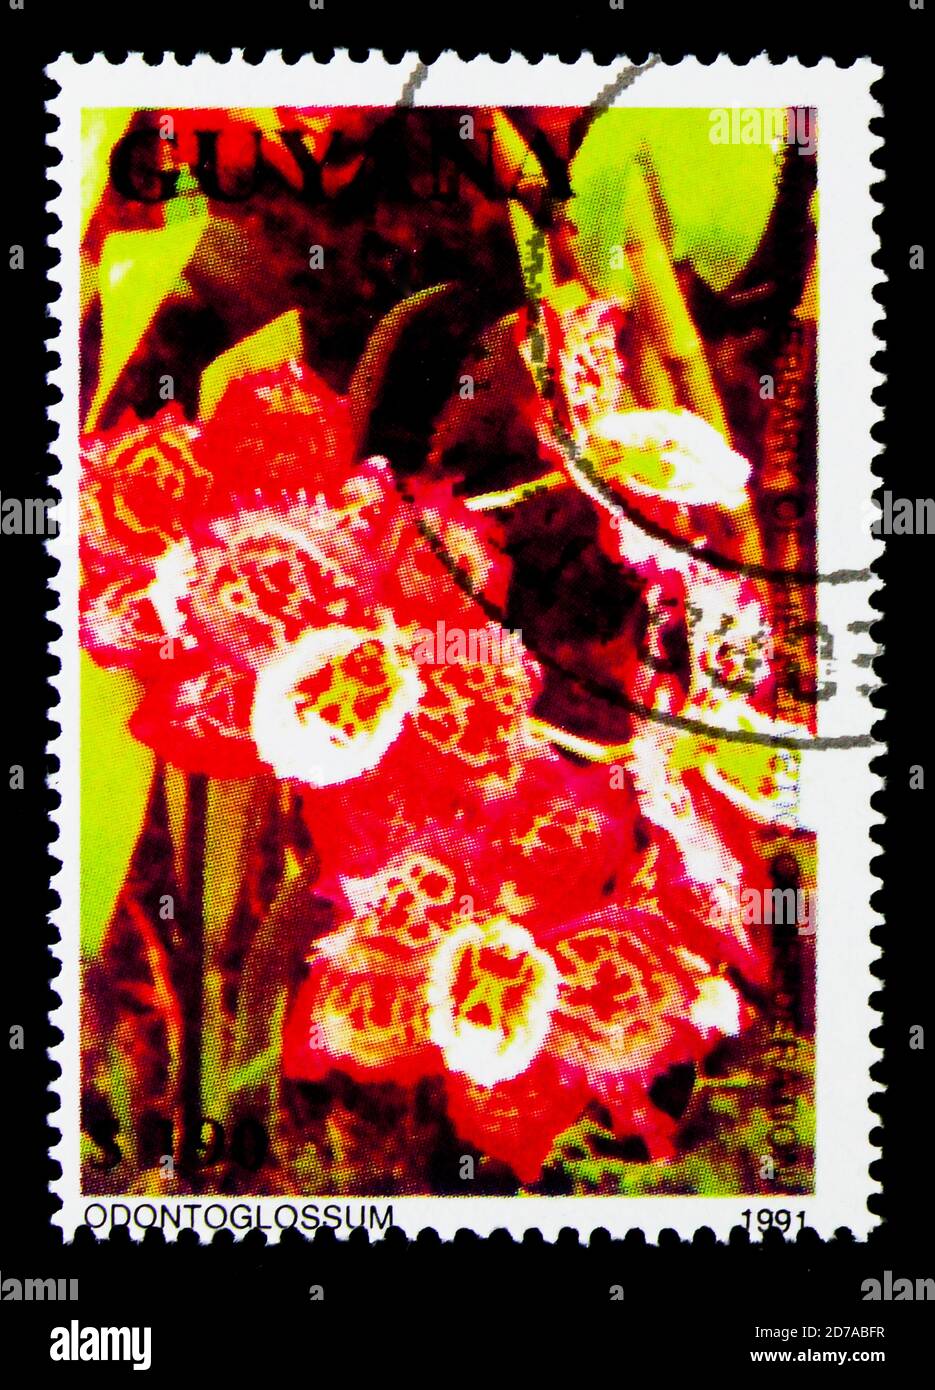 MOSCOW, RUSSIA - NOVEMBER 26, 2017: A stamp printed in Guyana shows Odontoglossum, Orchids serie, circa 1991 Stock Photo